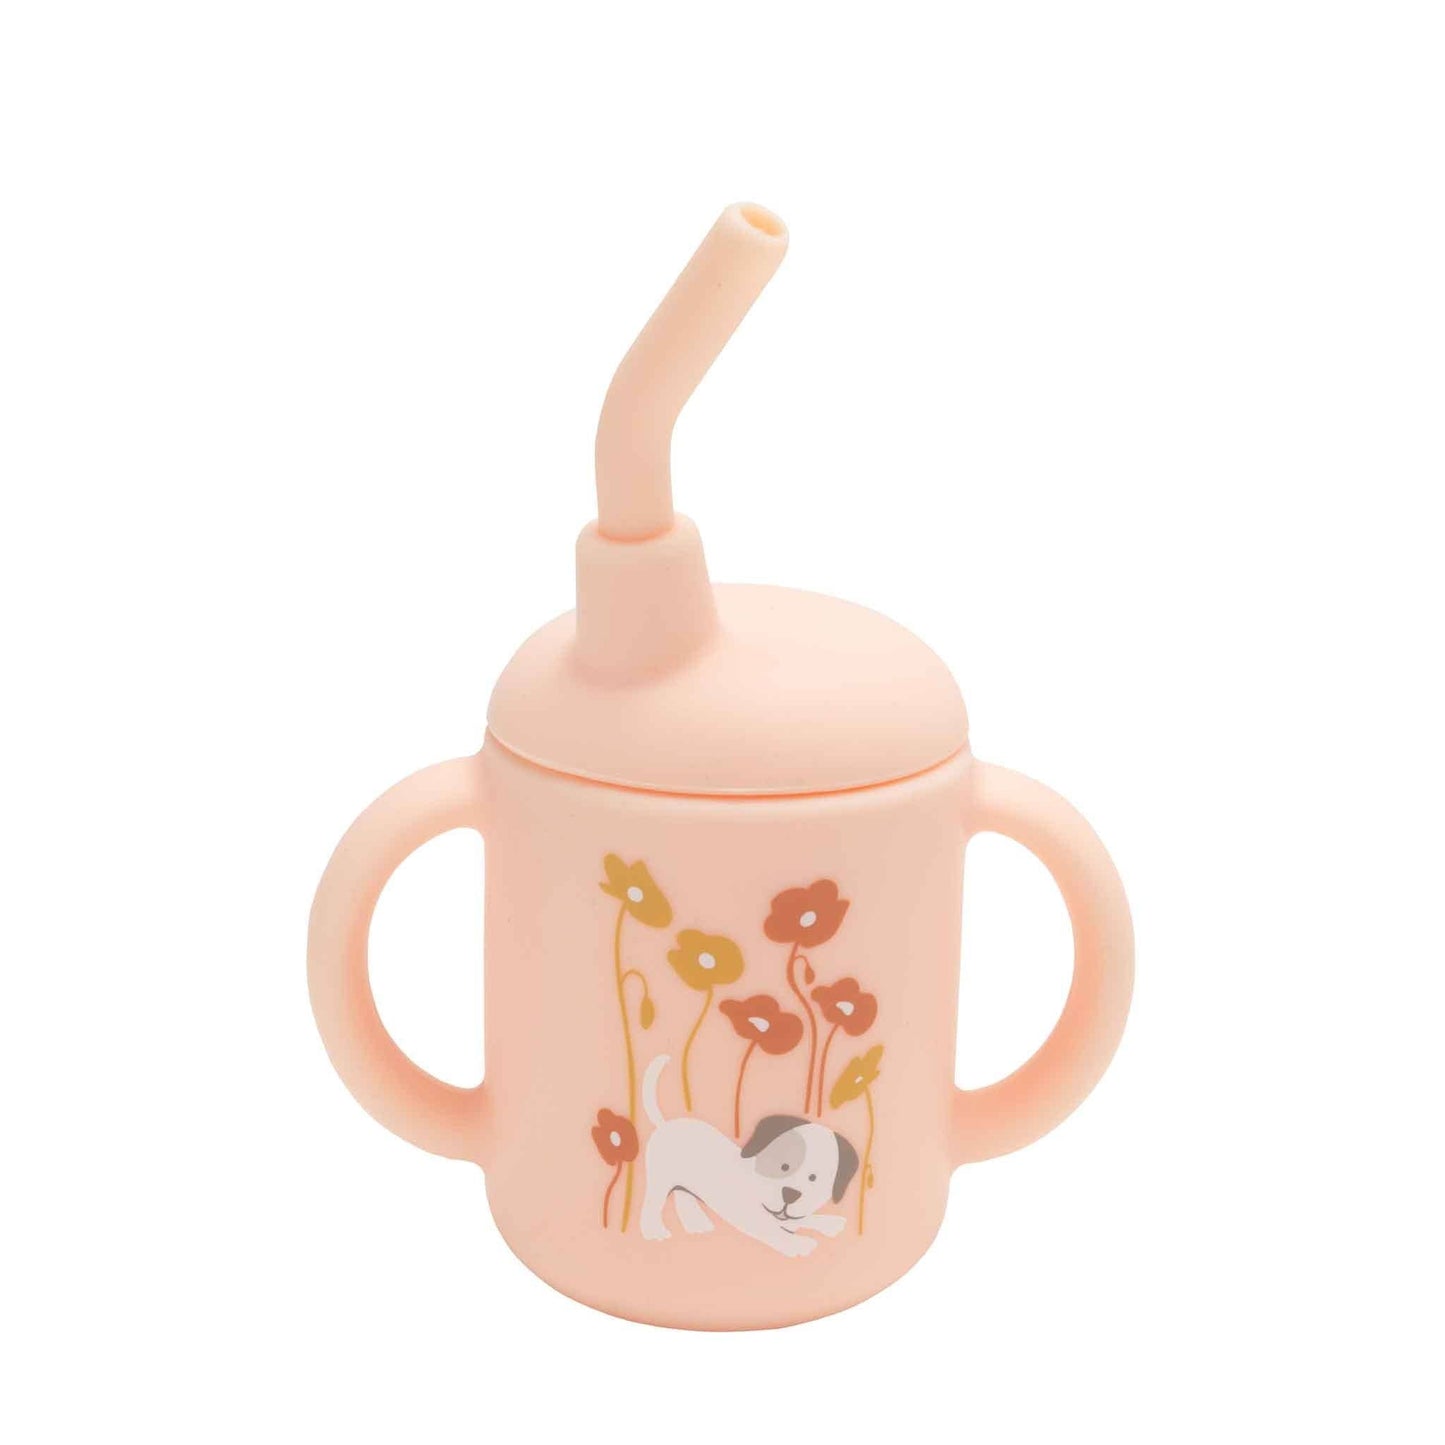 Sugarbooger by Ore’ Originals - Fresh & Messy Sippy Cup | Puppies & Poppies